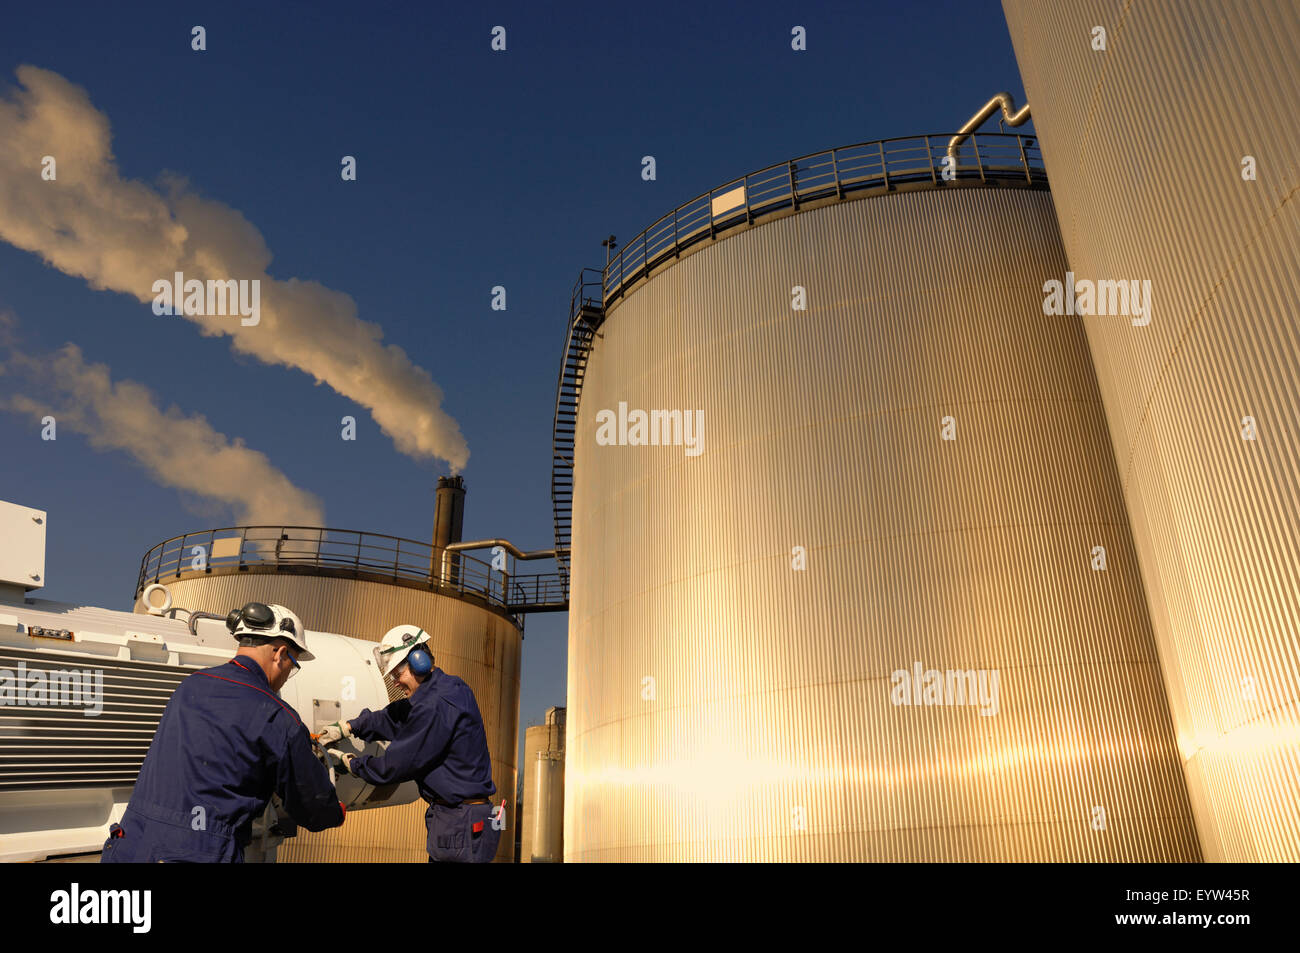 giant oil and fuel storage with workers Stock Photo